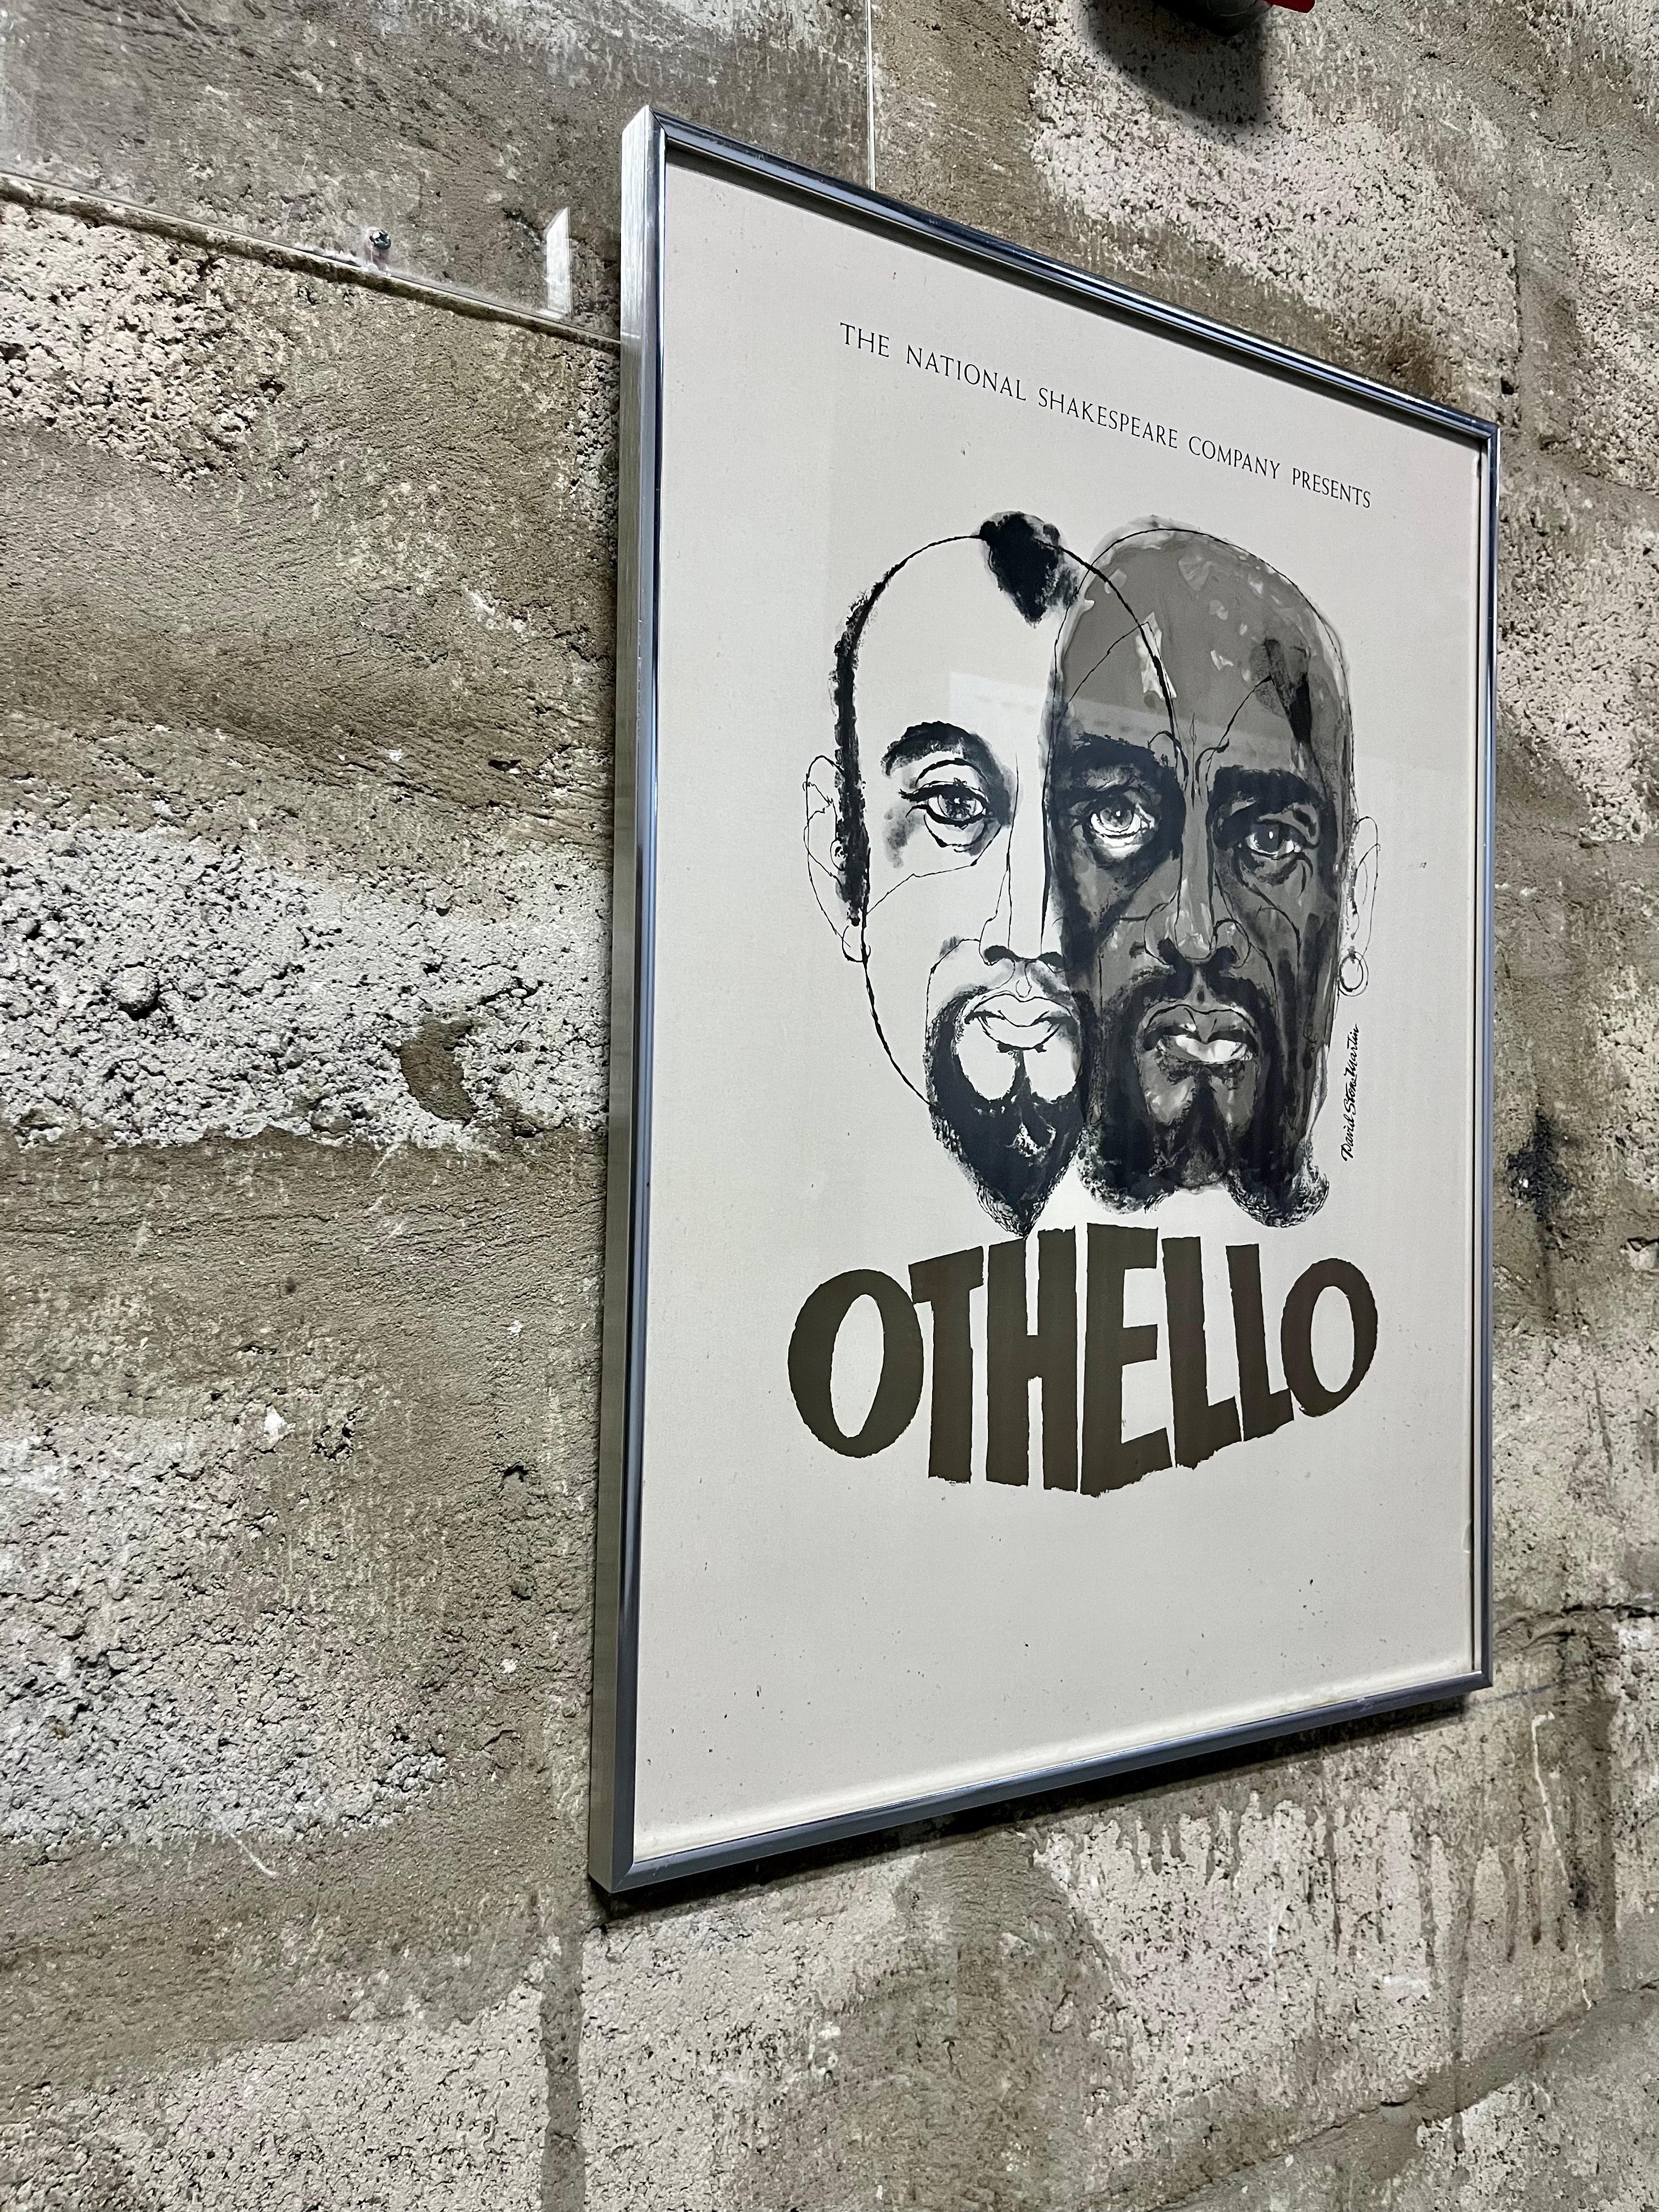 Vintage The National Shakespeare Company Presents-Othello Framed Poster. C 1970s In Good Condition For Sale In Miami, FL